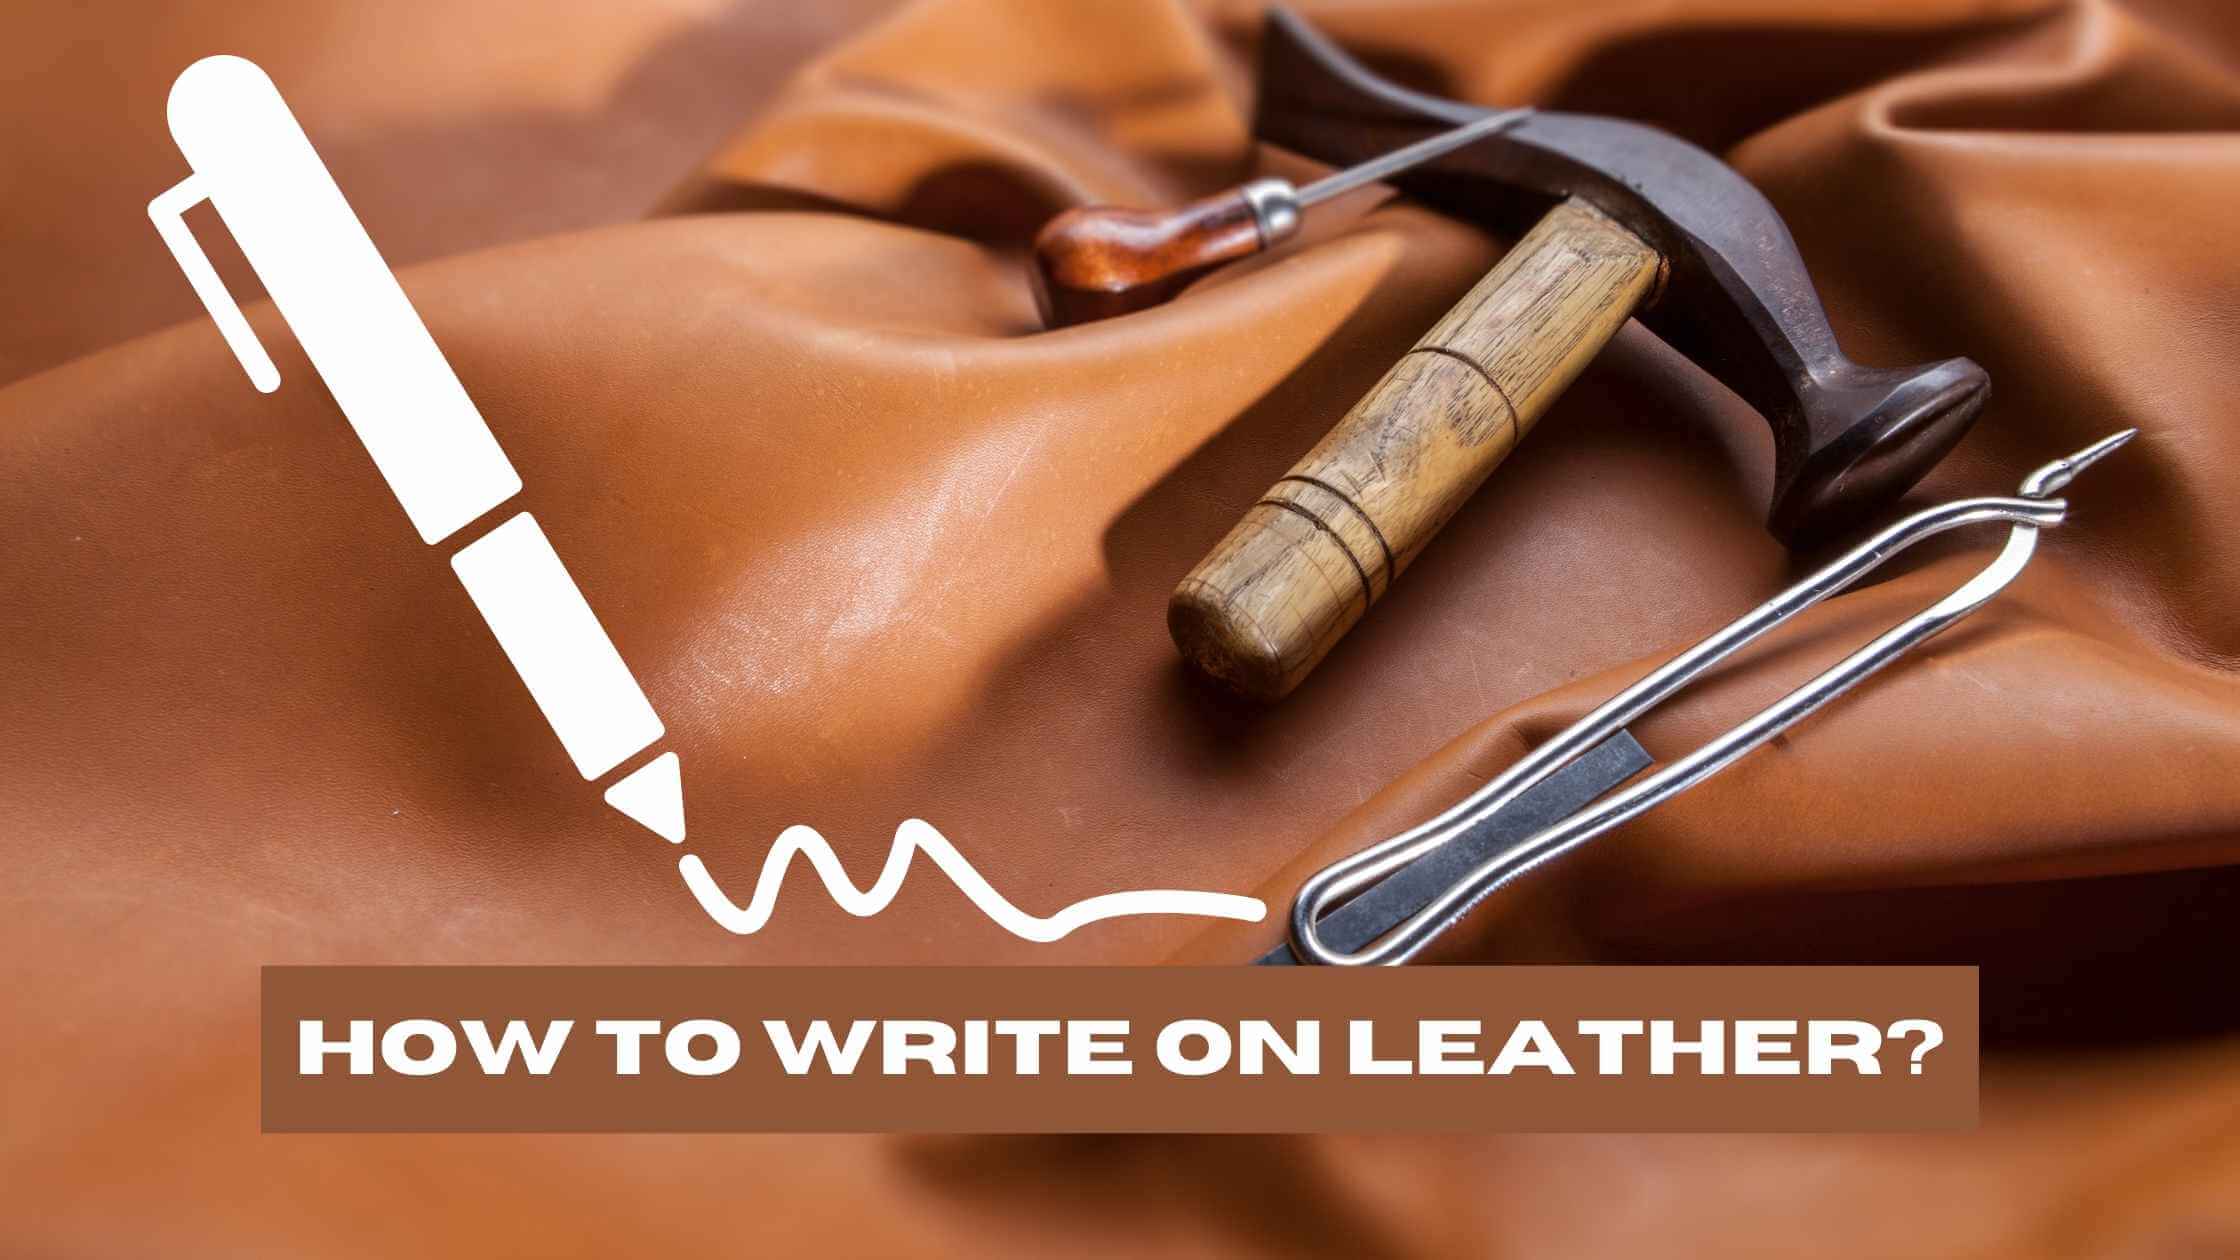 How to Write on Leather